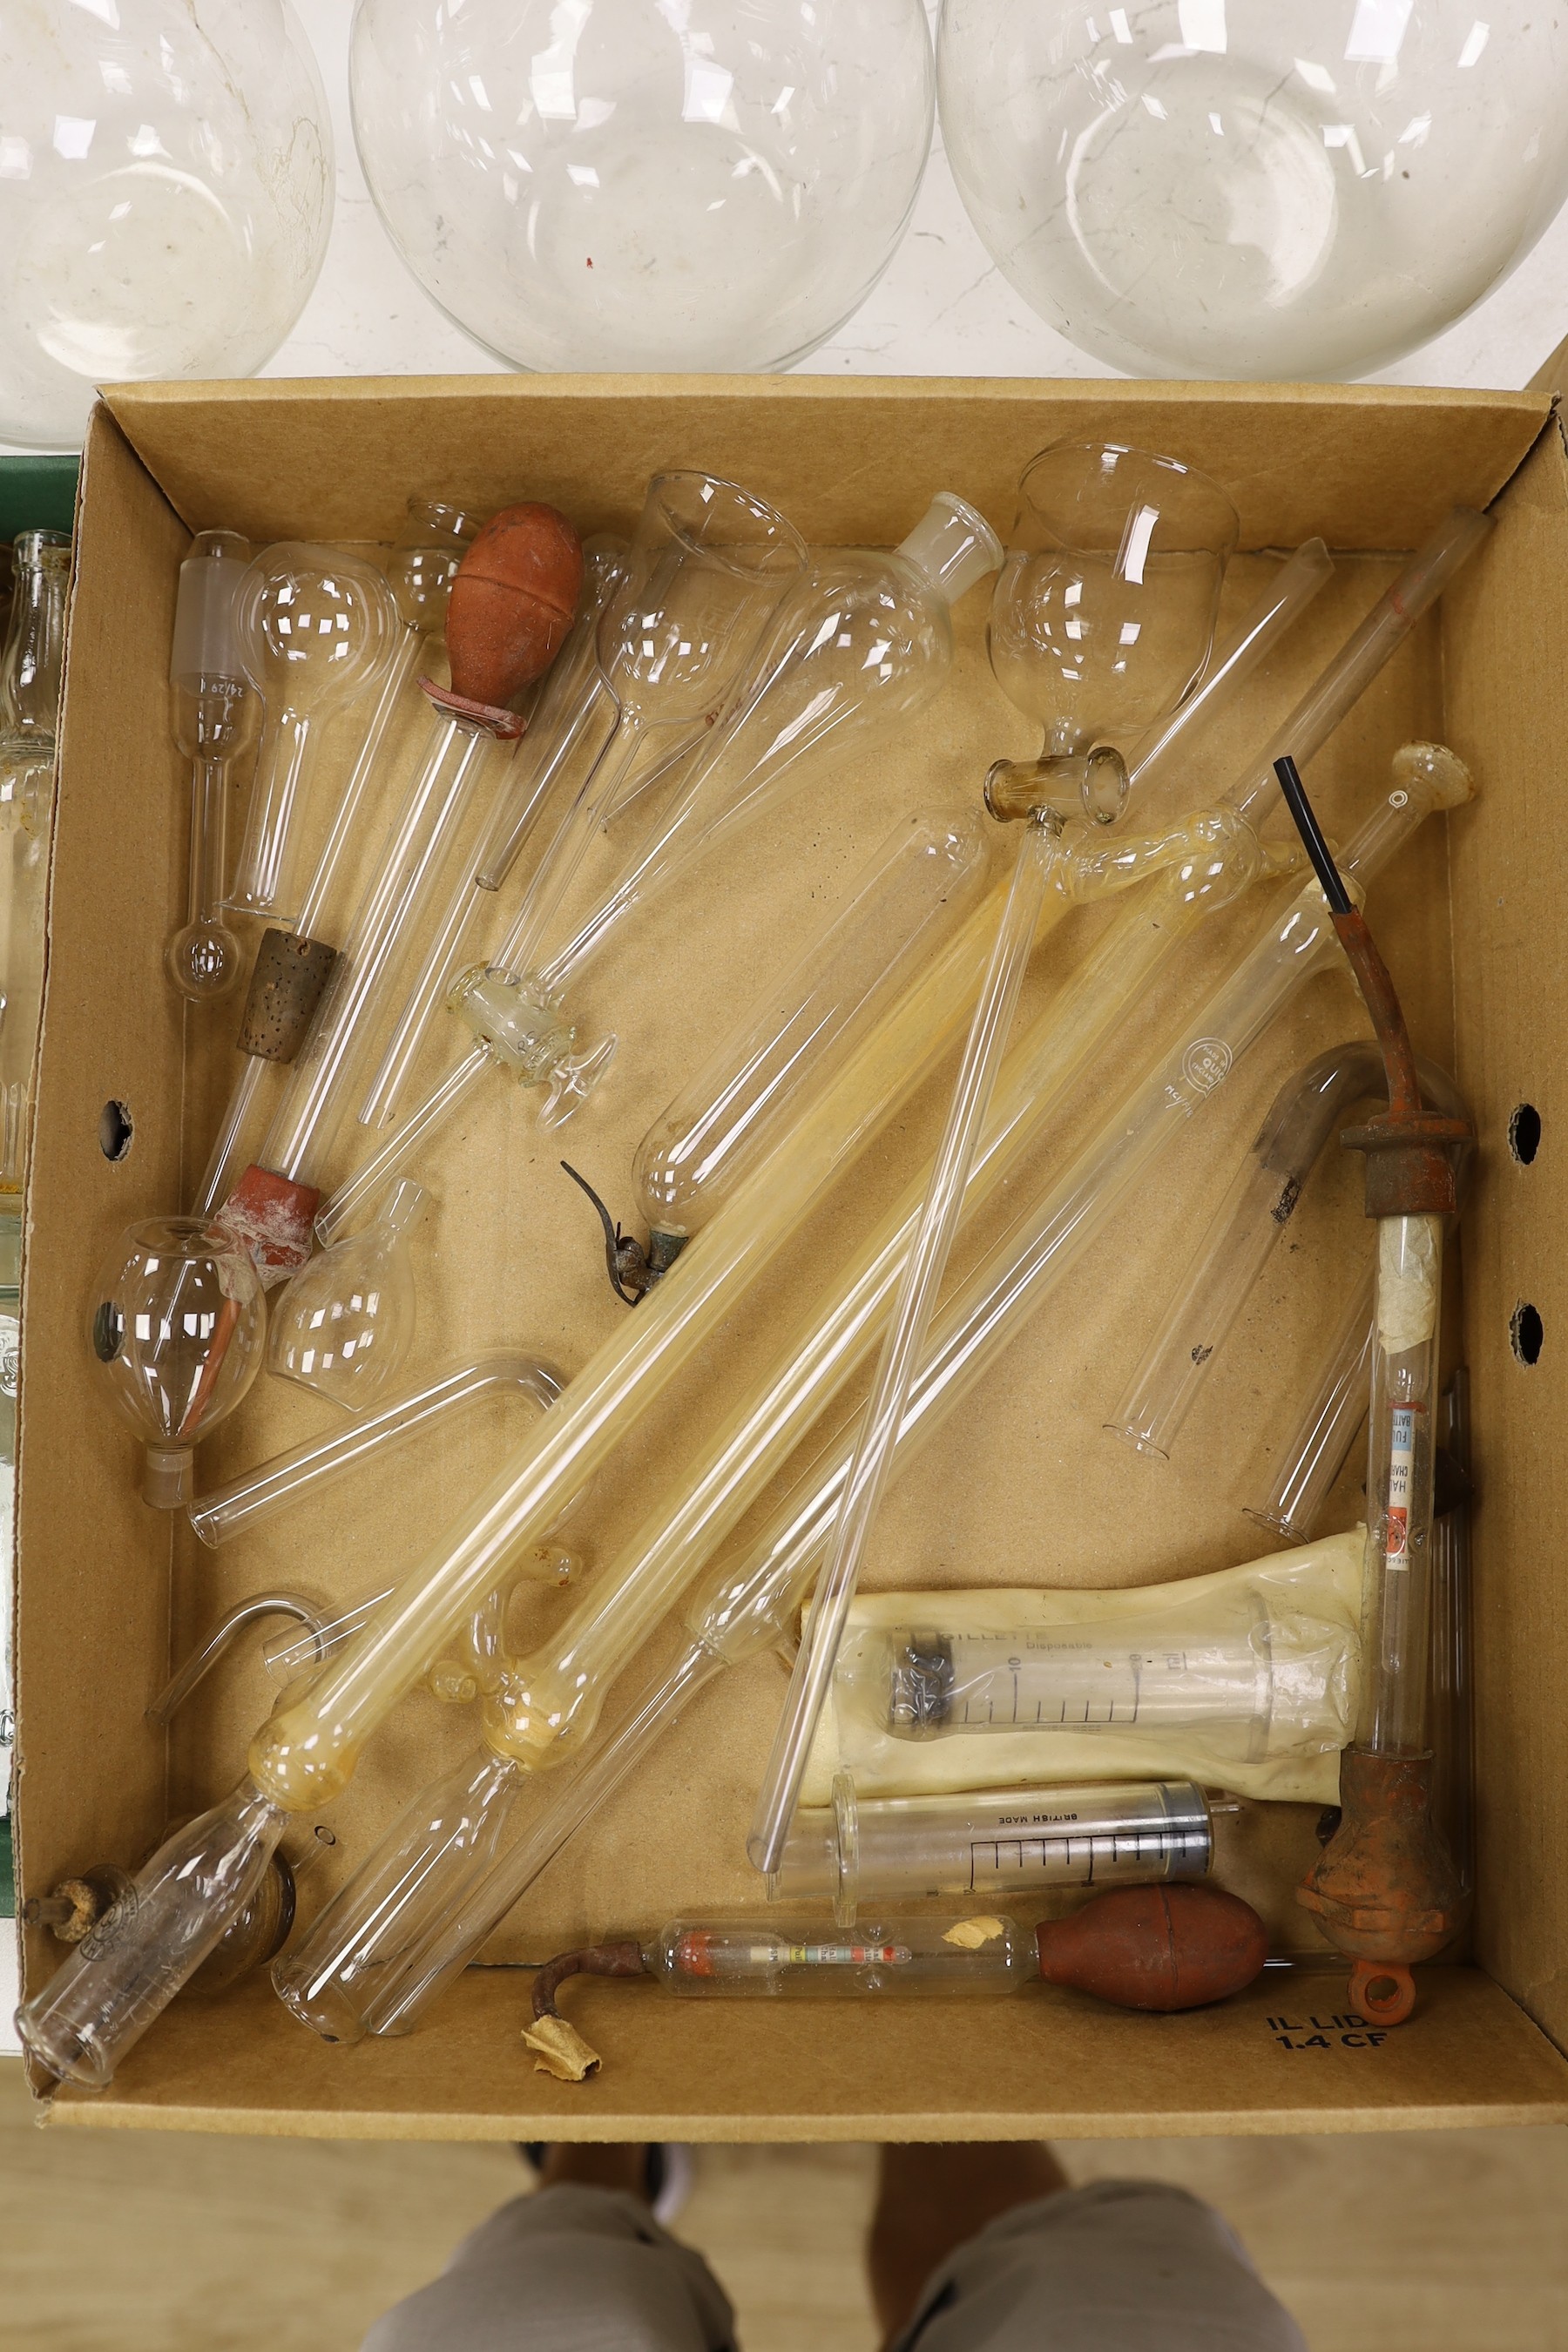 A pre-war chemistry set including stirring sticks, pipettes, tubes and bottles